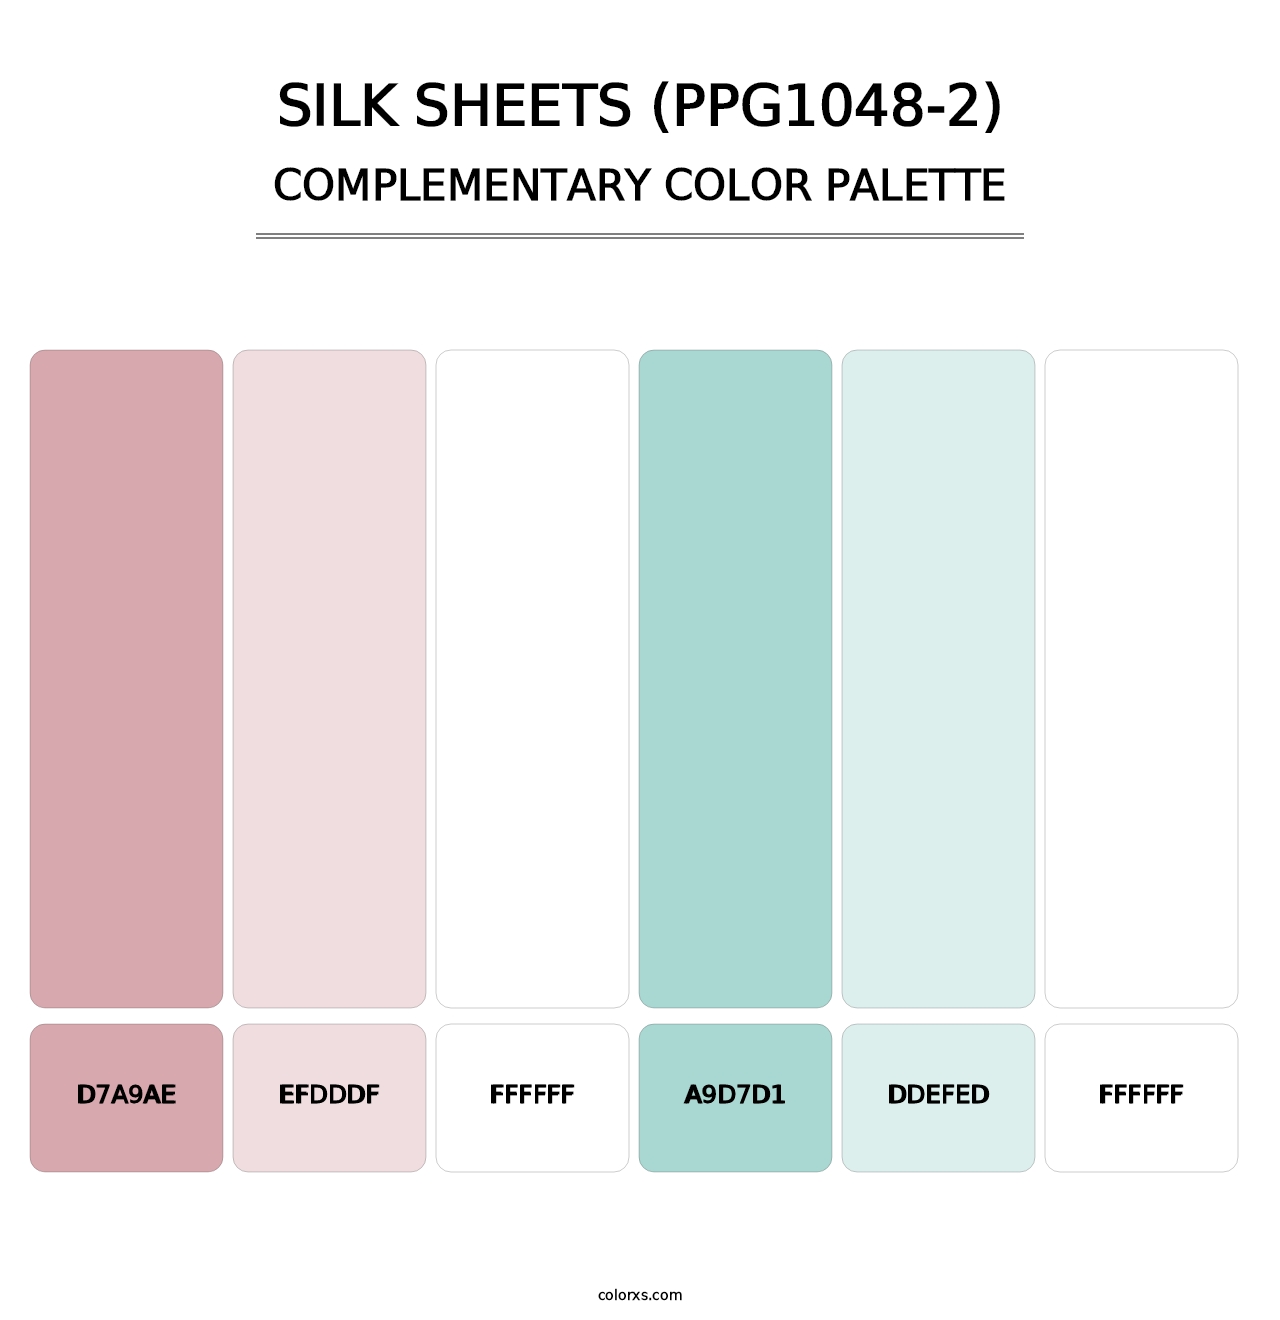 Silk Sheets (PPG1048-2) - Complementary Color Palette